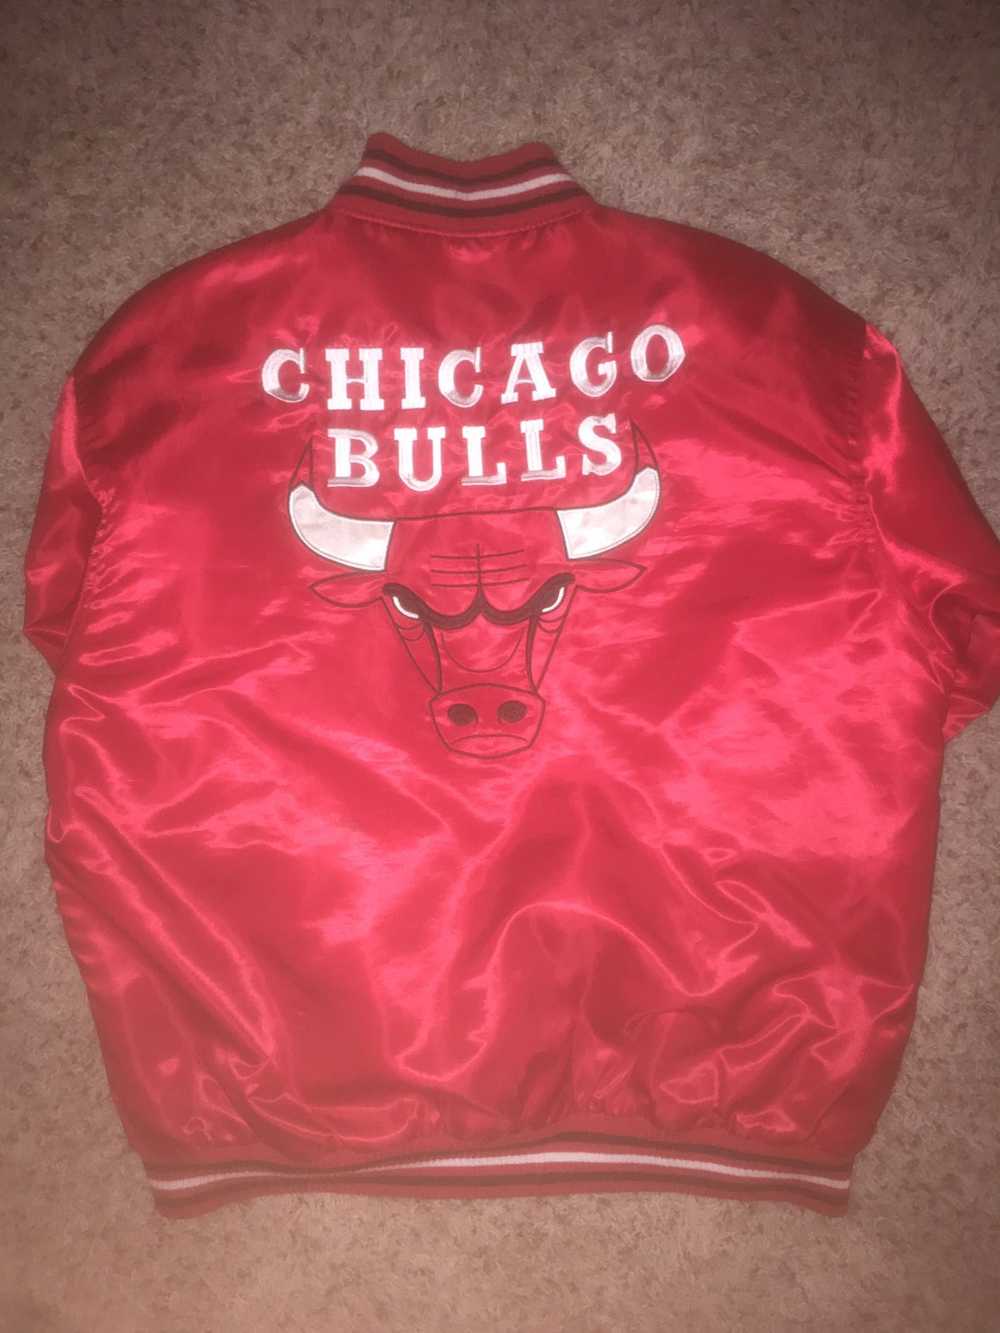 NBA Chicago Bulls Jacket by JH Design Group - image 2